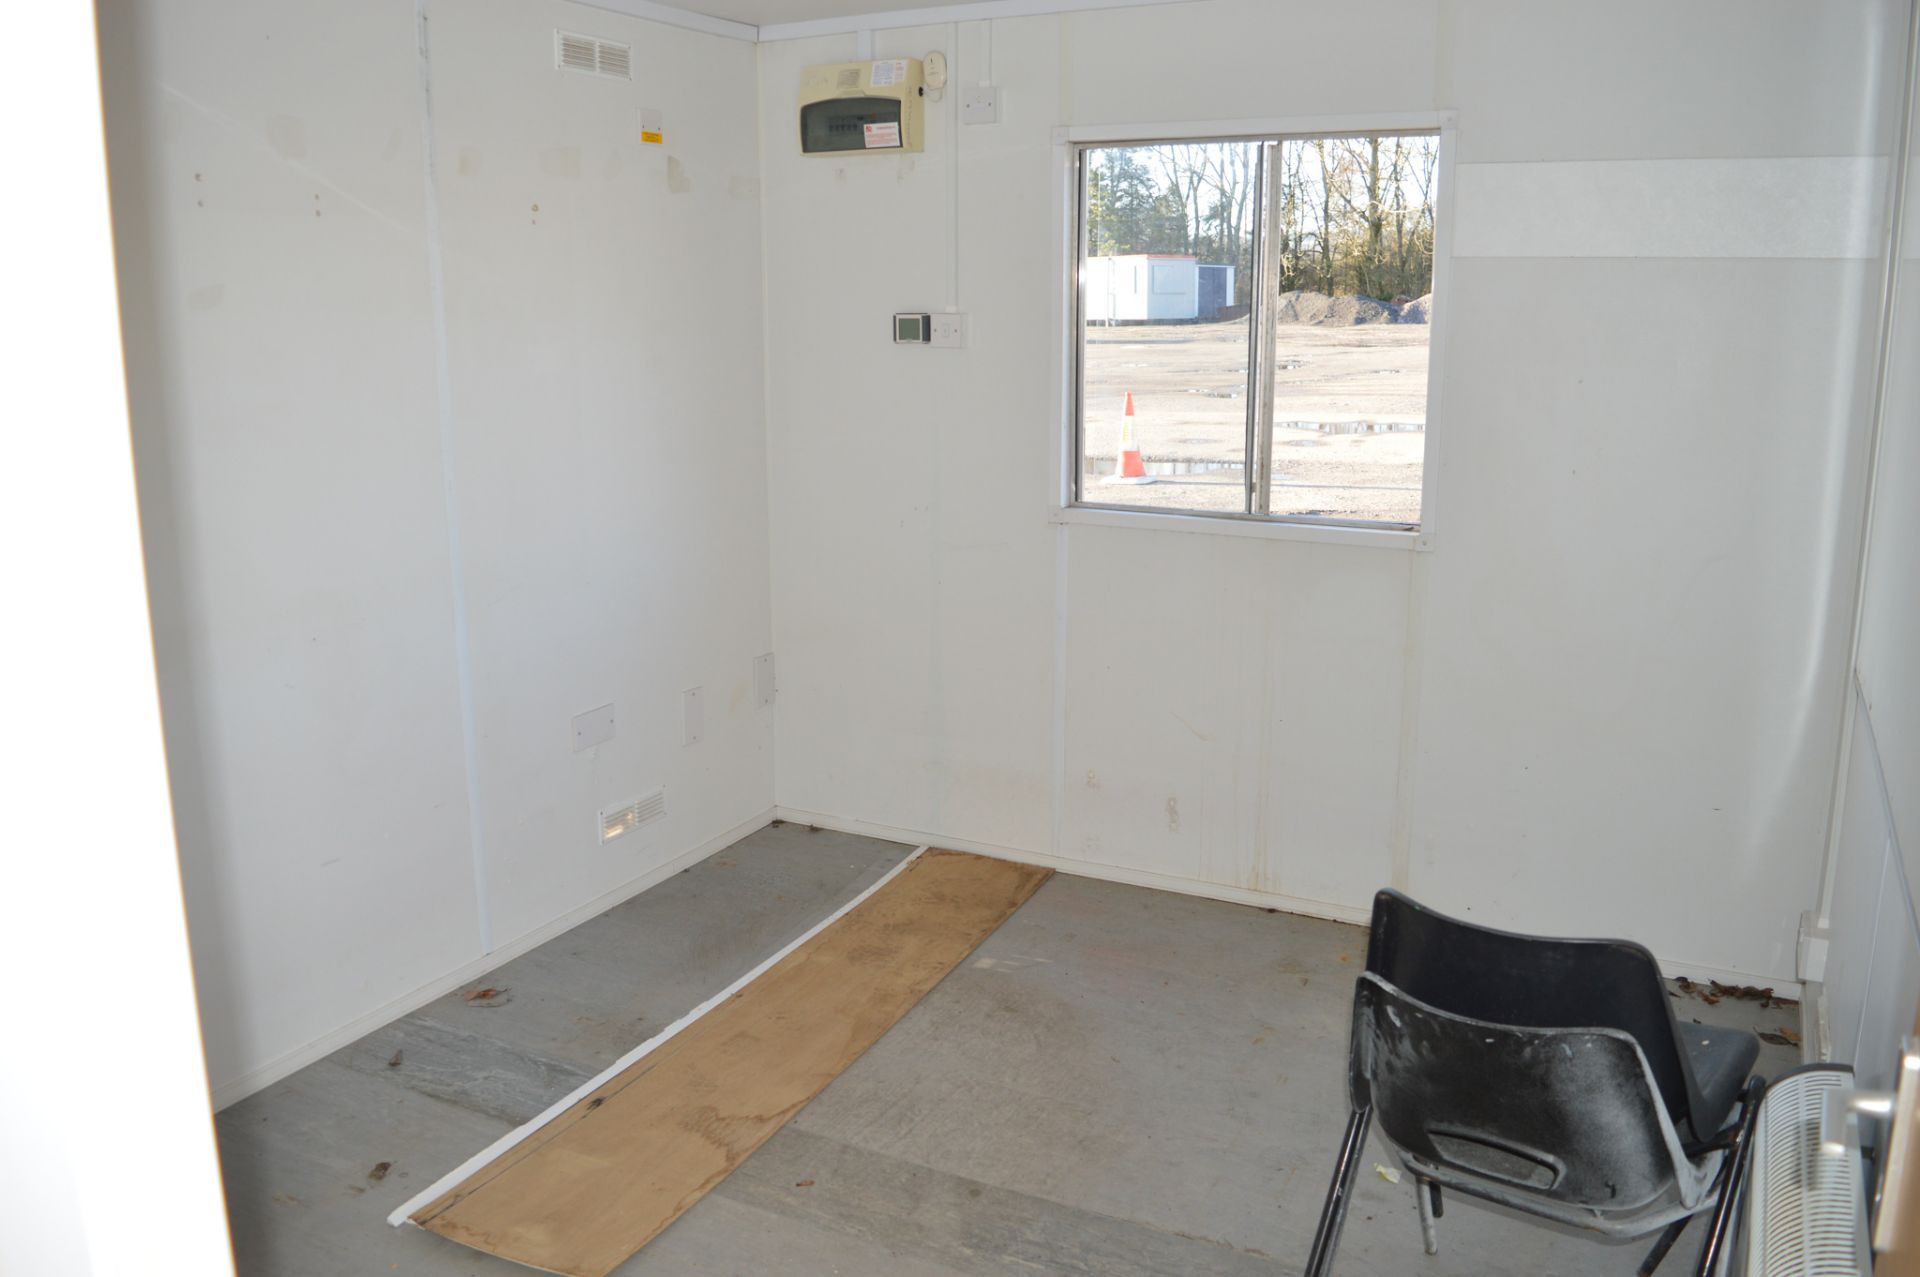 32 ft x 10 ft steel anti-vandal jack leg site office unit comprising of 2 offices BBA1379 - Image 5 of 9